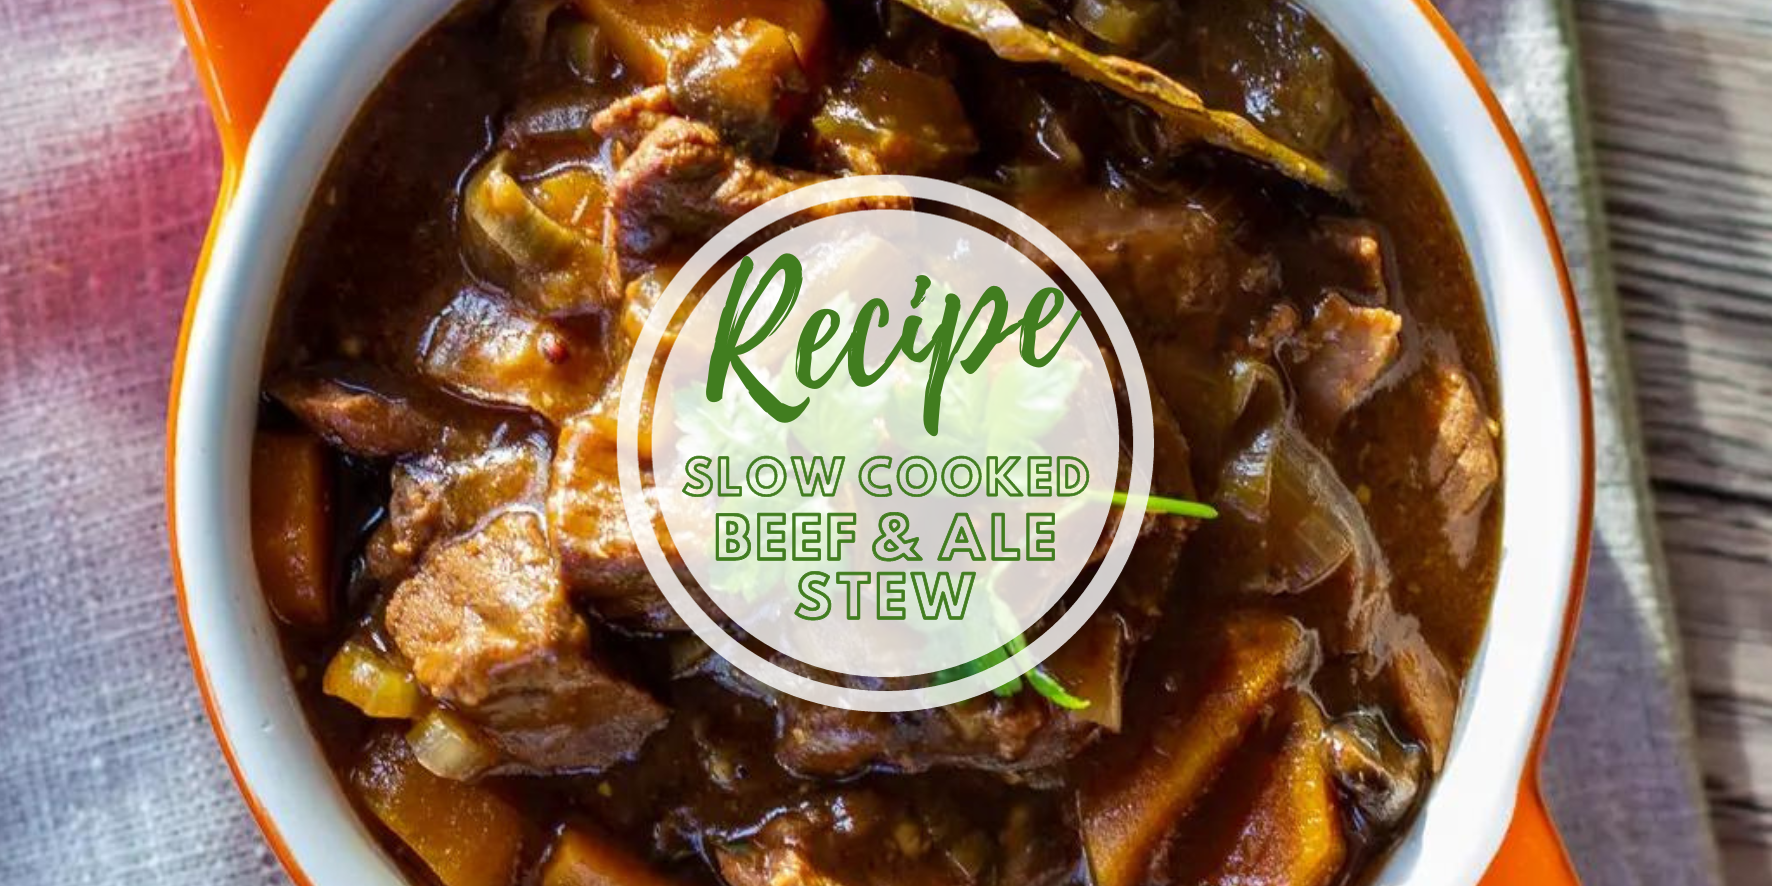 Slow Cooked Beef & Ale Stew Recipe